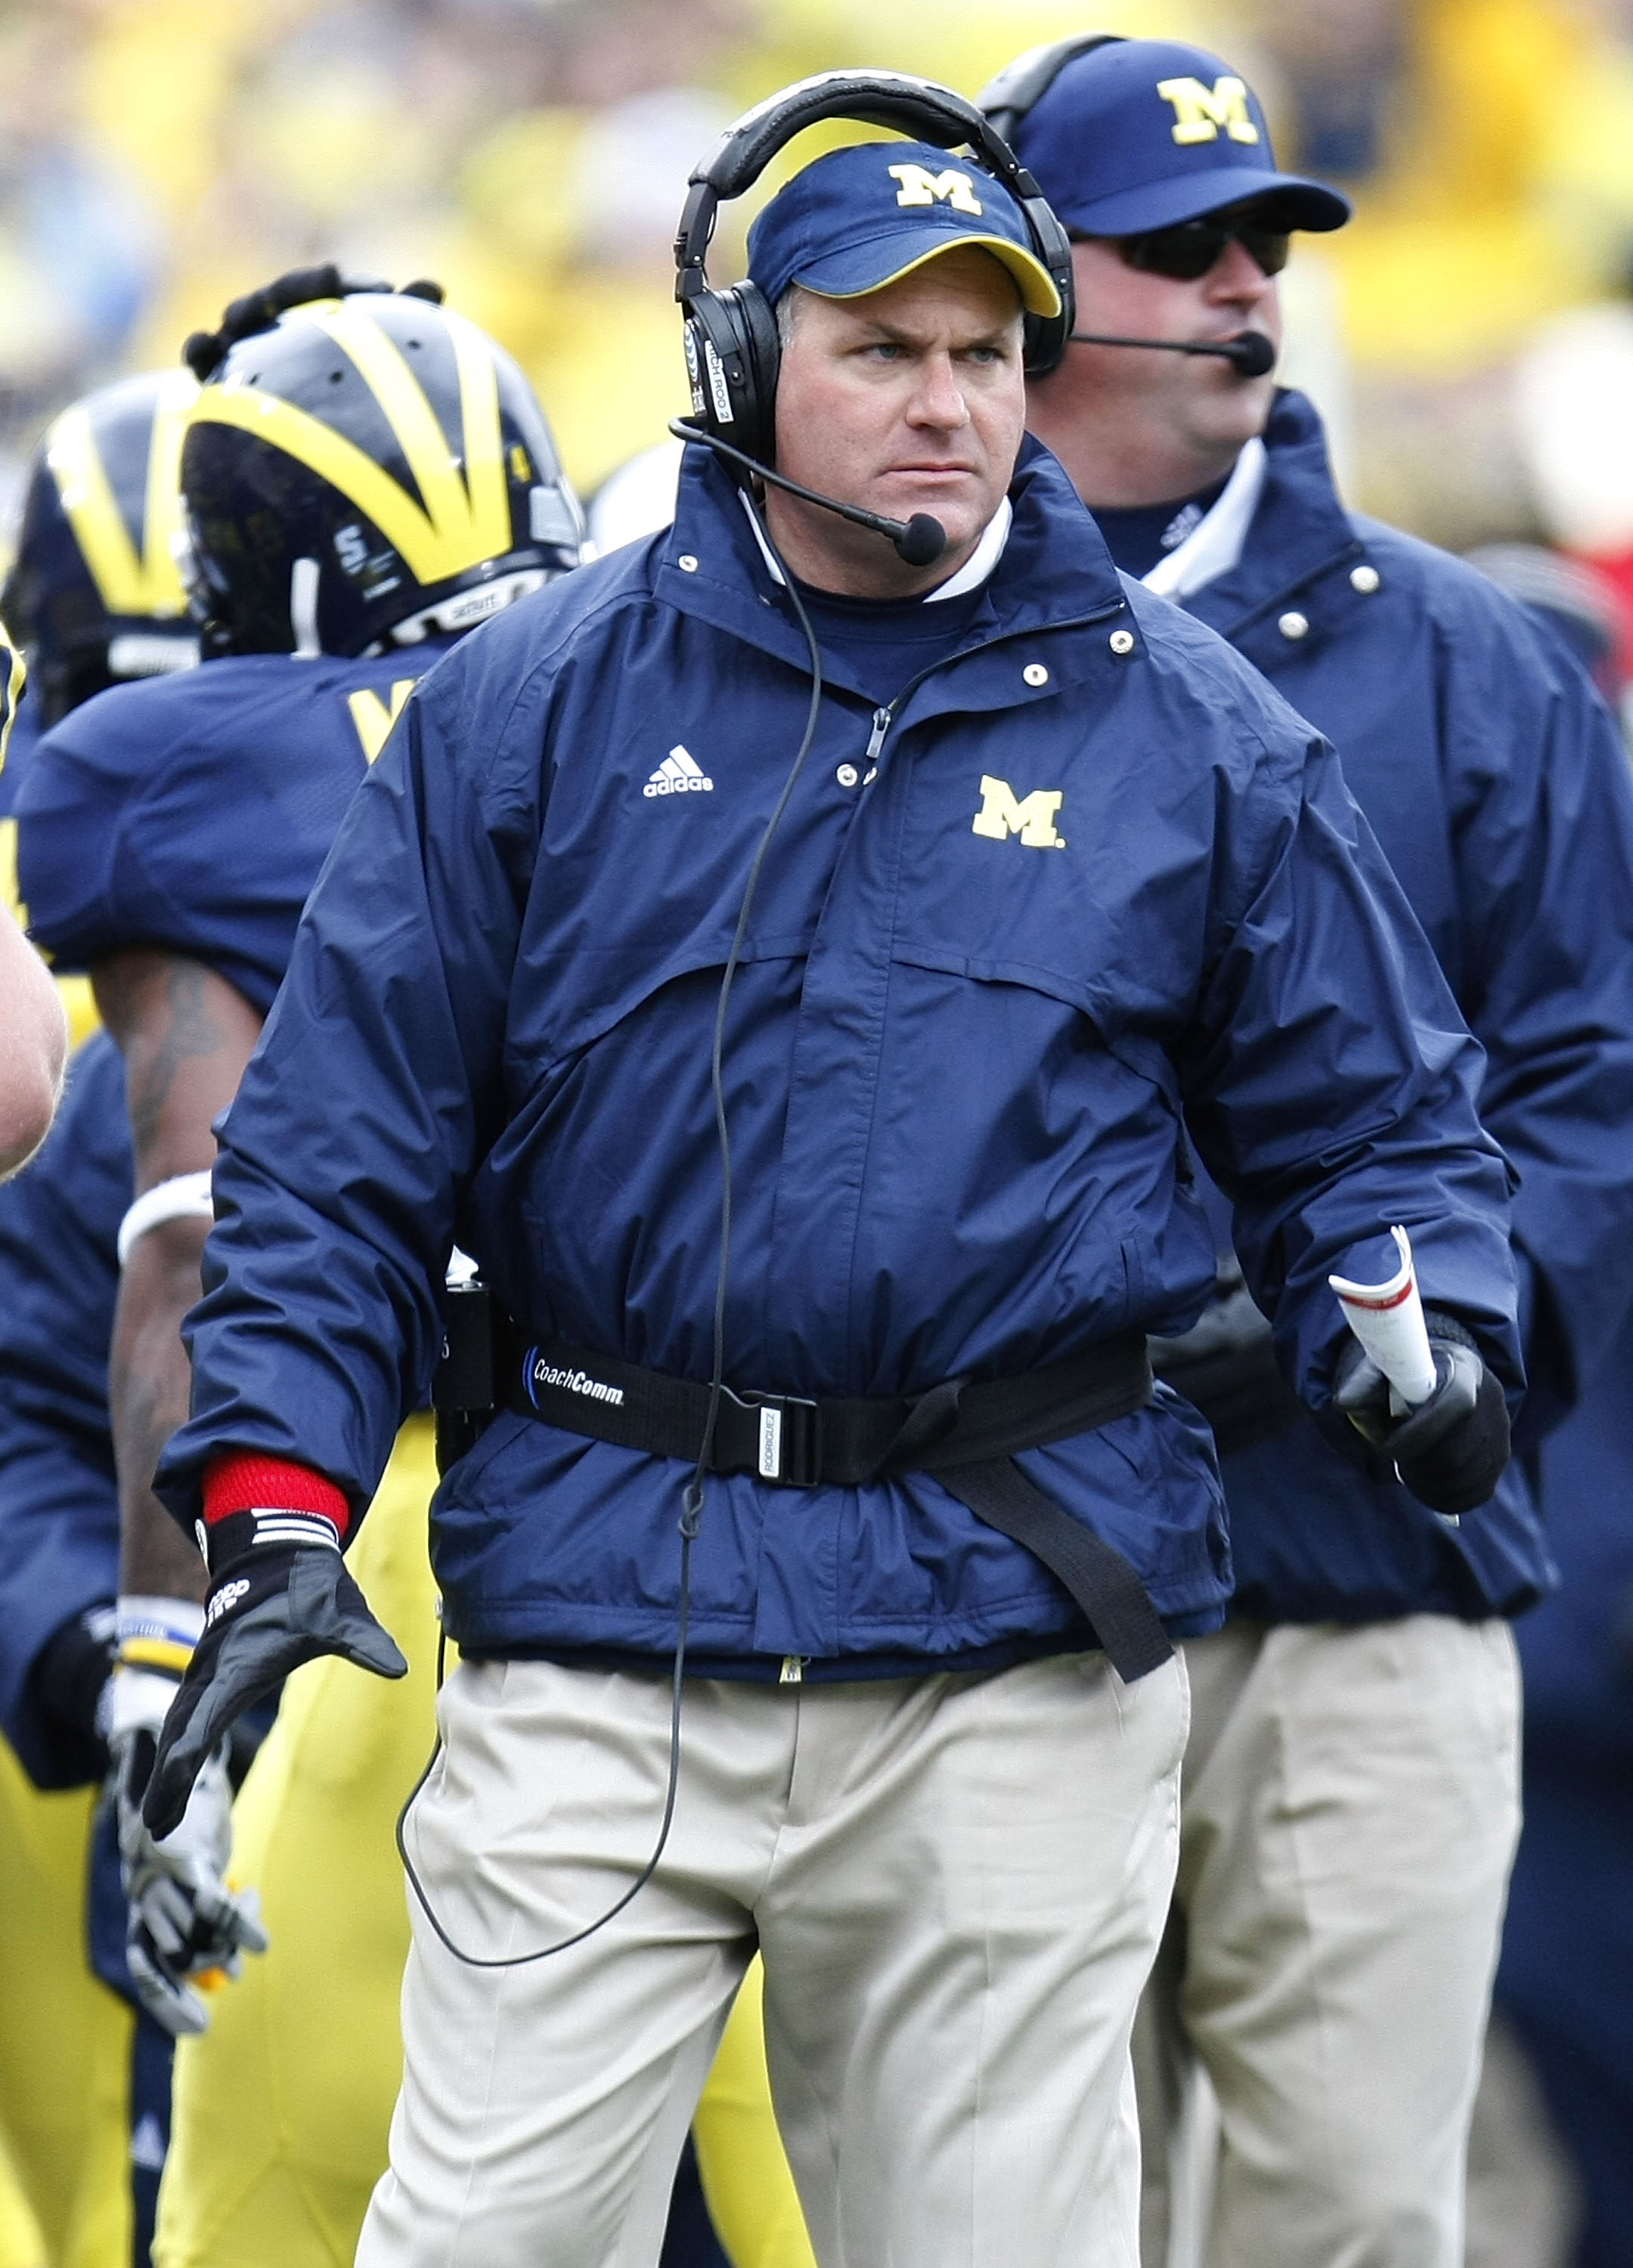 ANN ARBOR, MI - OCTOBER 24:  Head Coach Rich Rodriguez of the Michigan Wolverines looks on while playing the Penn State Nittany Lions on October 24, 2009 at Michigan Stadium in Ann Arbor, Michigan. Penn State won the game 35-10.  (Photo by Gregory Shamus/